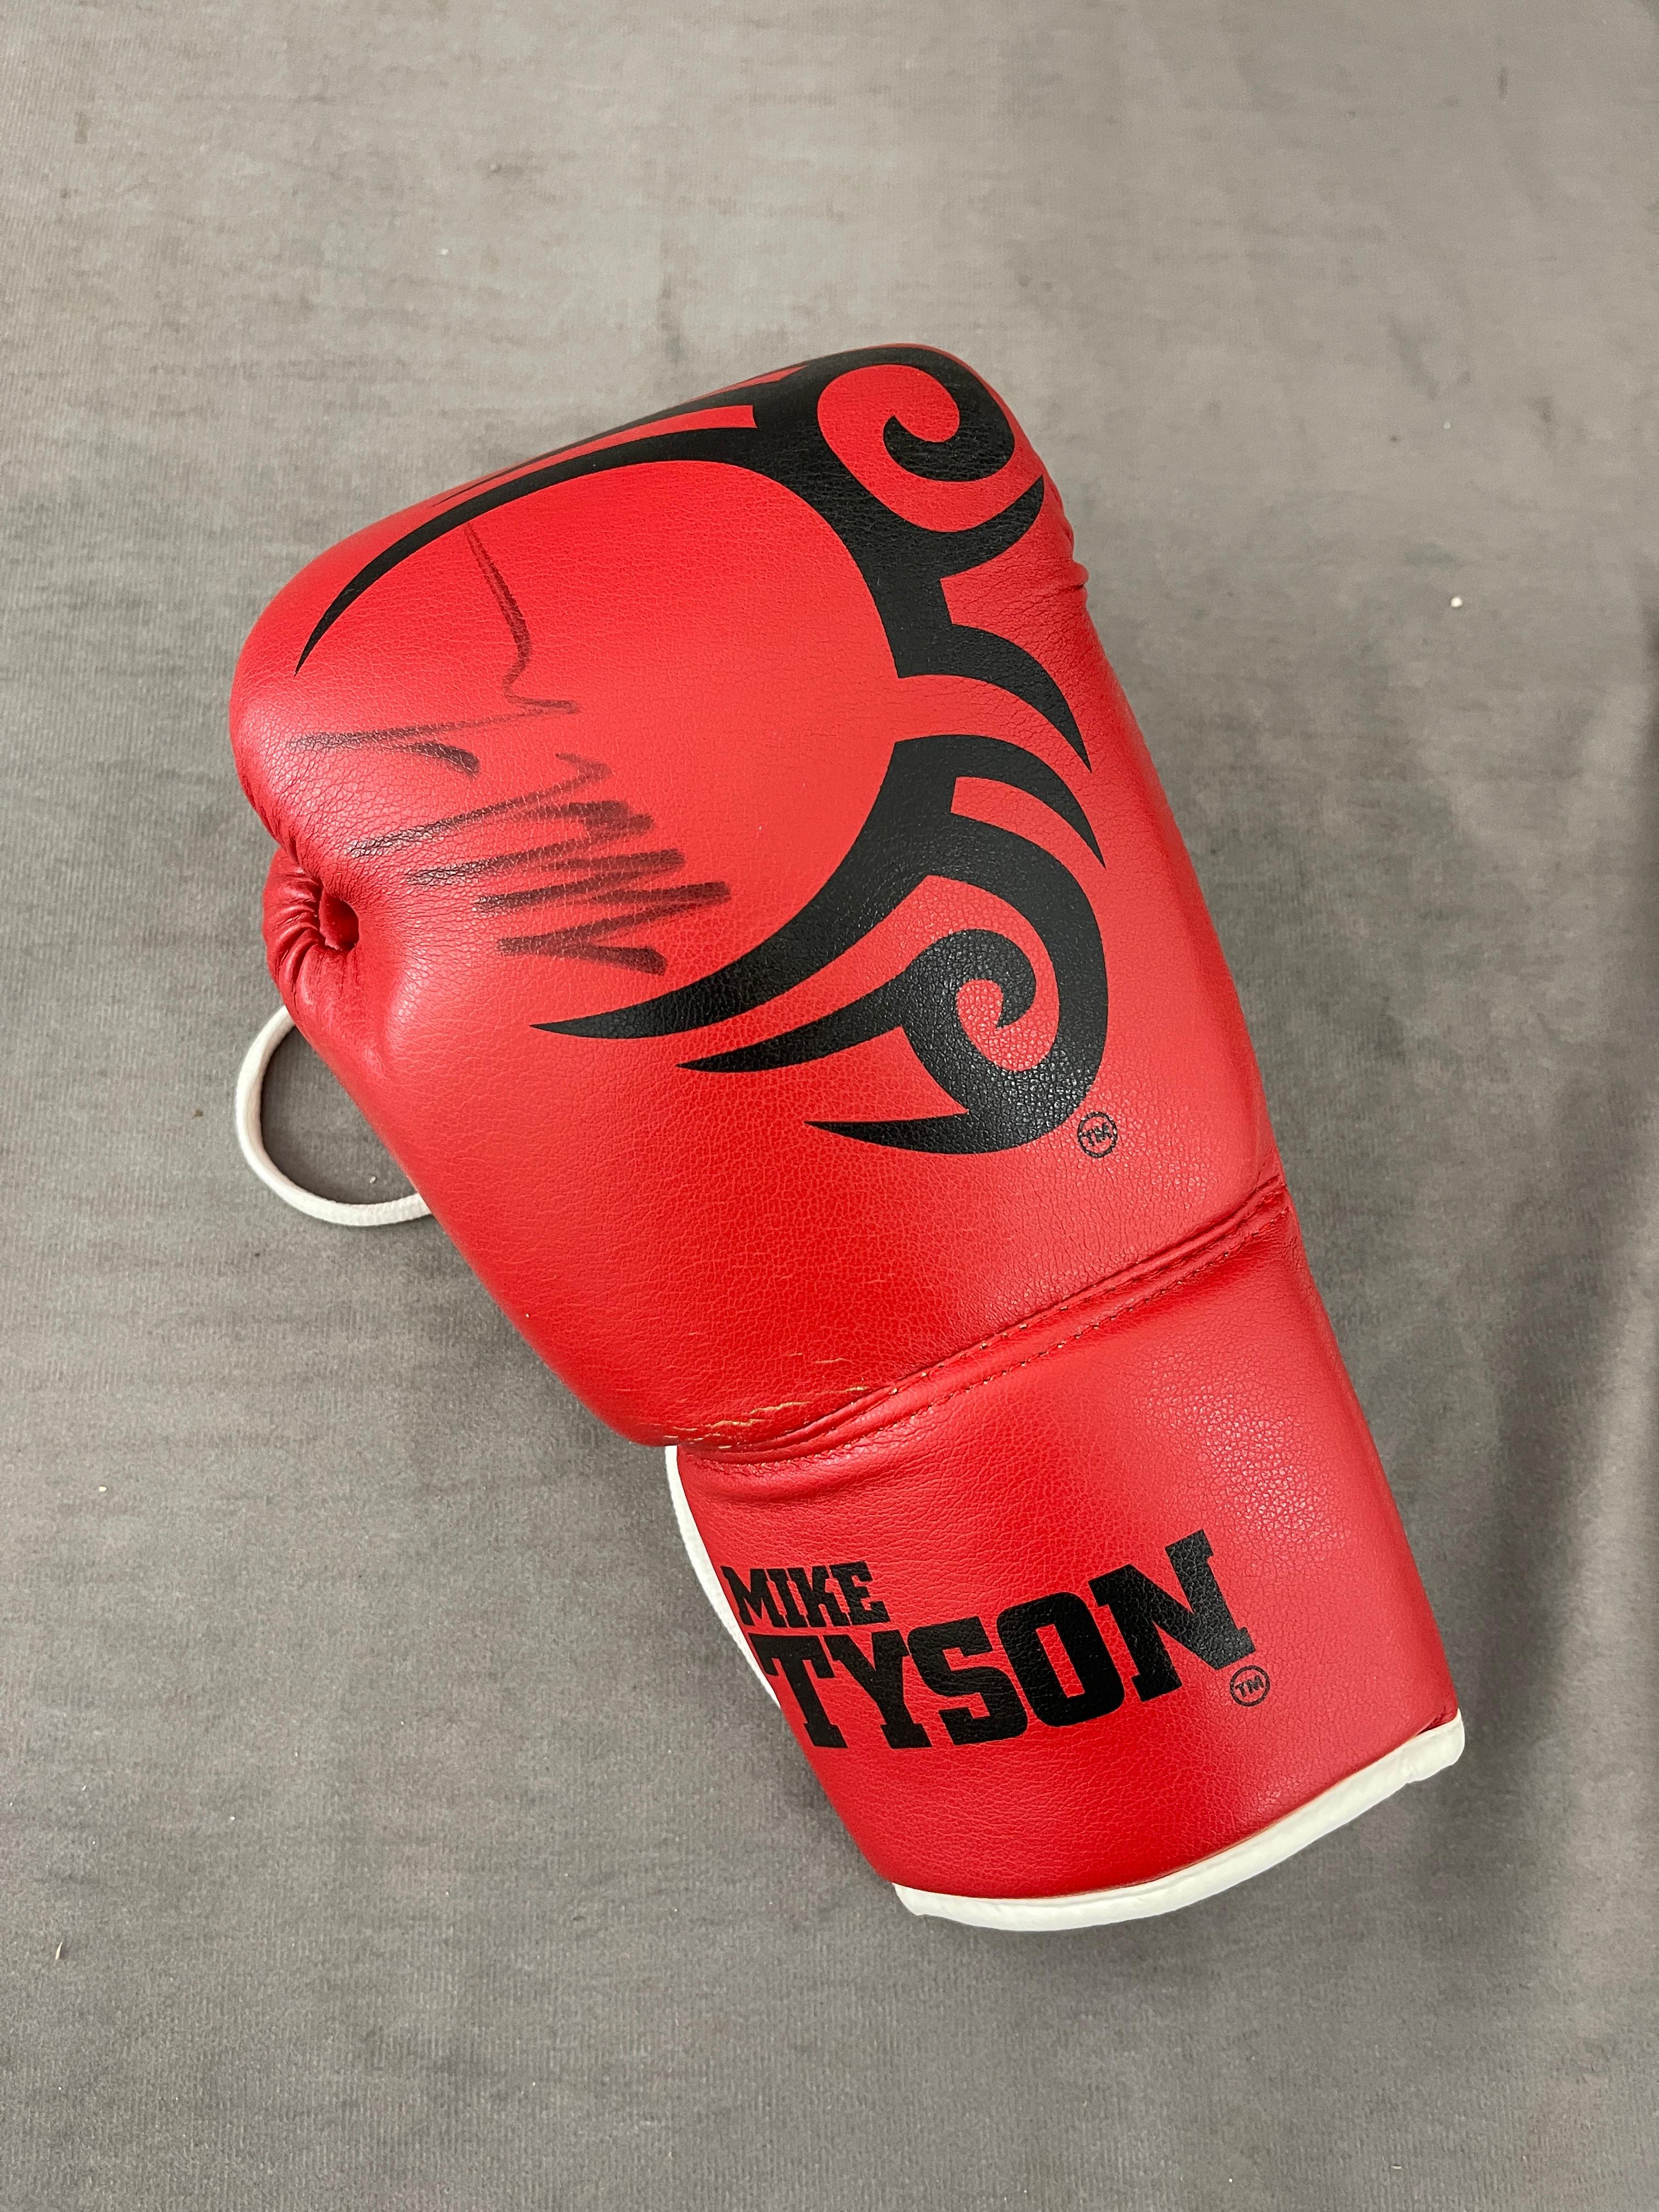 Mike Tyson Signed Autographed Boxing Glove with Photo Matched